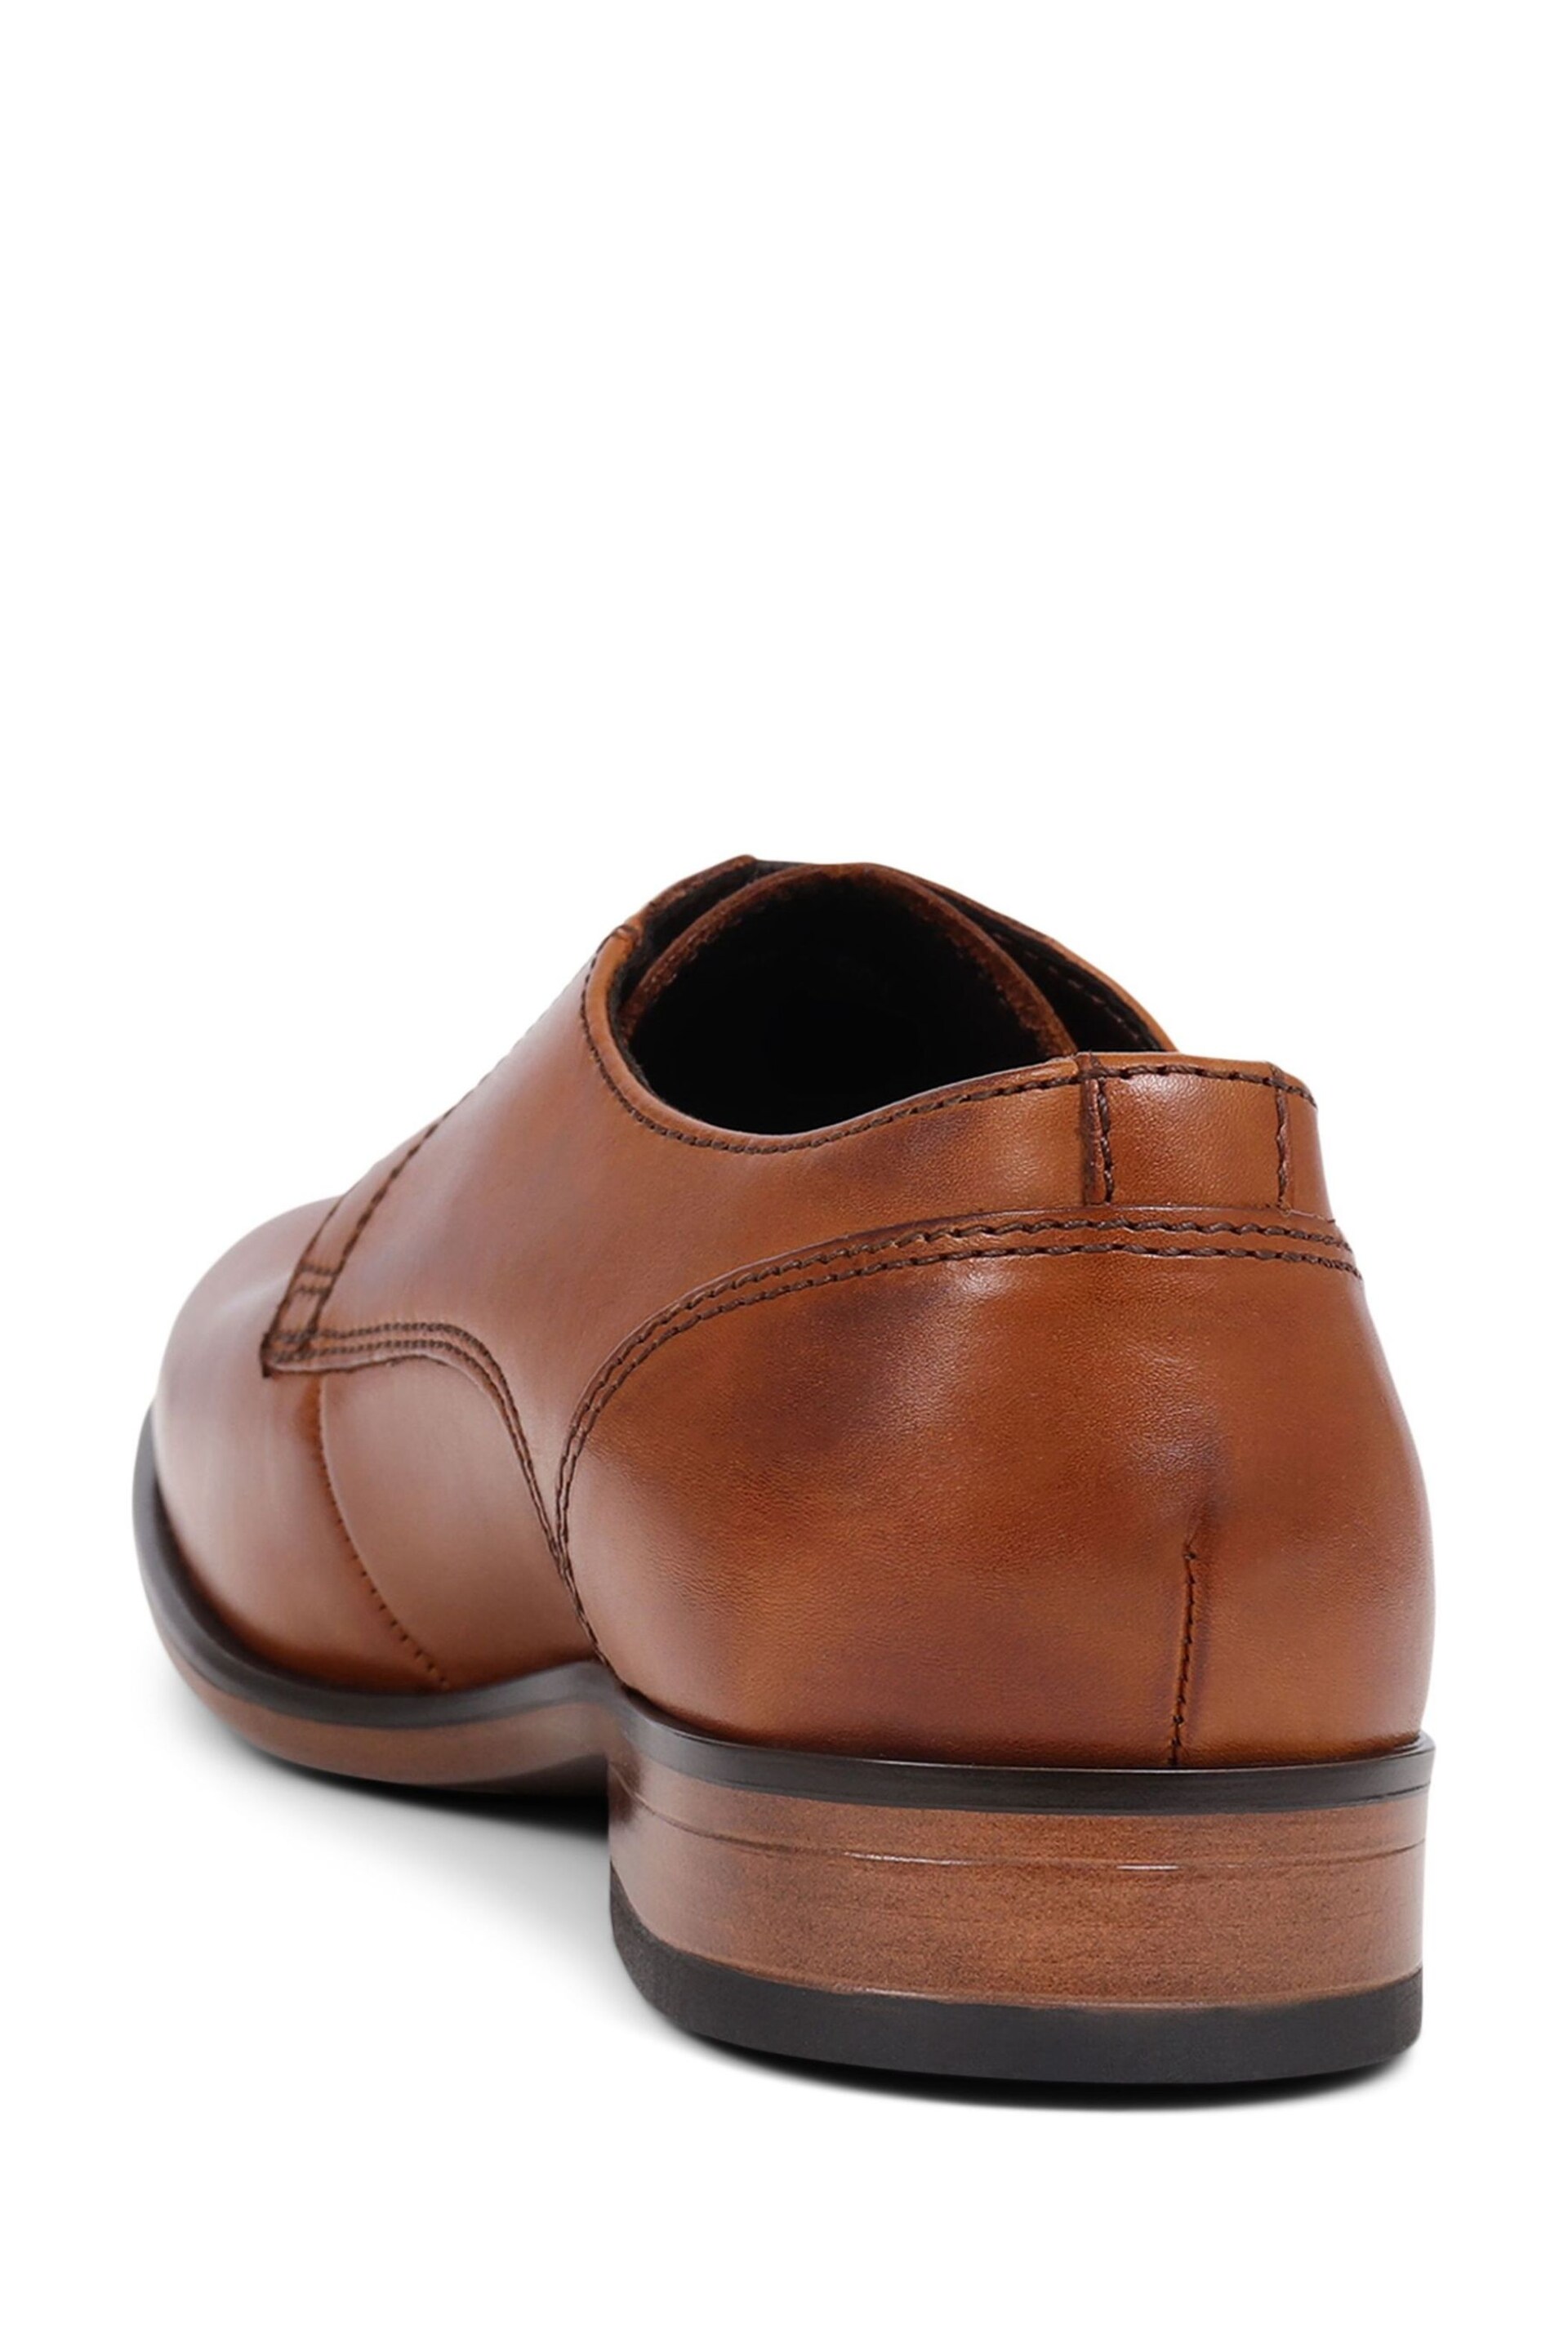 Pavers Leather Lace-Up Brown Shoes - Image 3 of 5